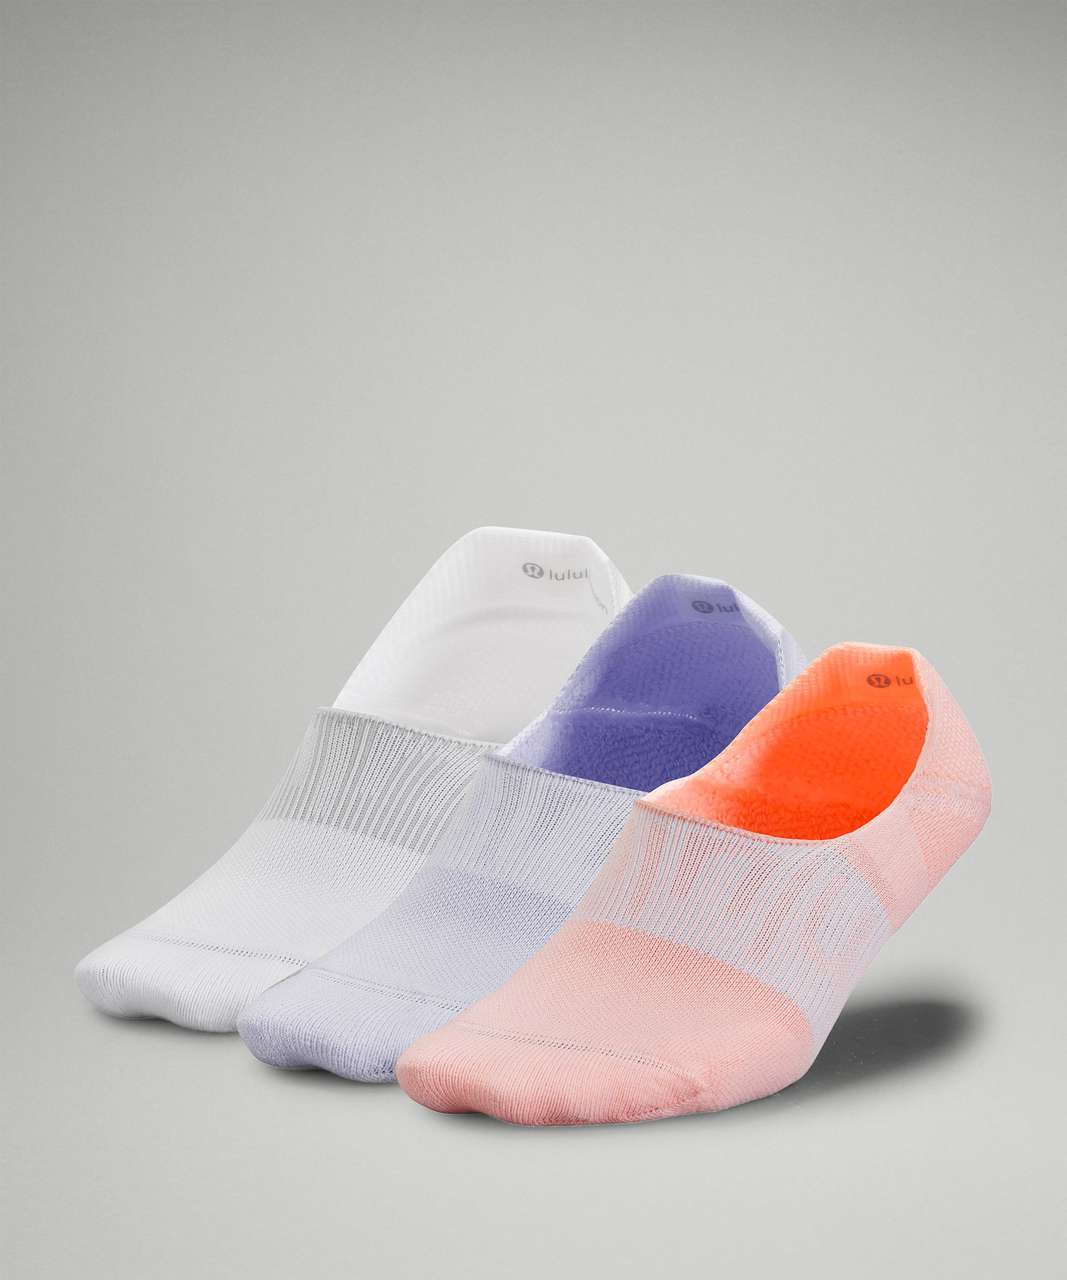 Lululemon Power Stride No-Show Sock with Active Grip 3 Pack - Dew Pink / Pastel Blue / White